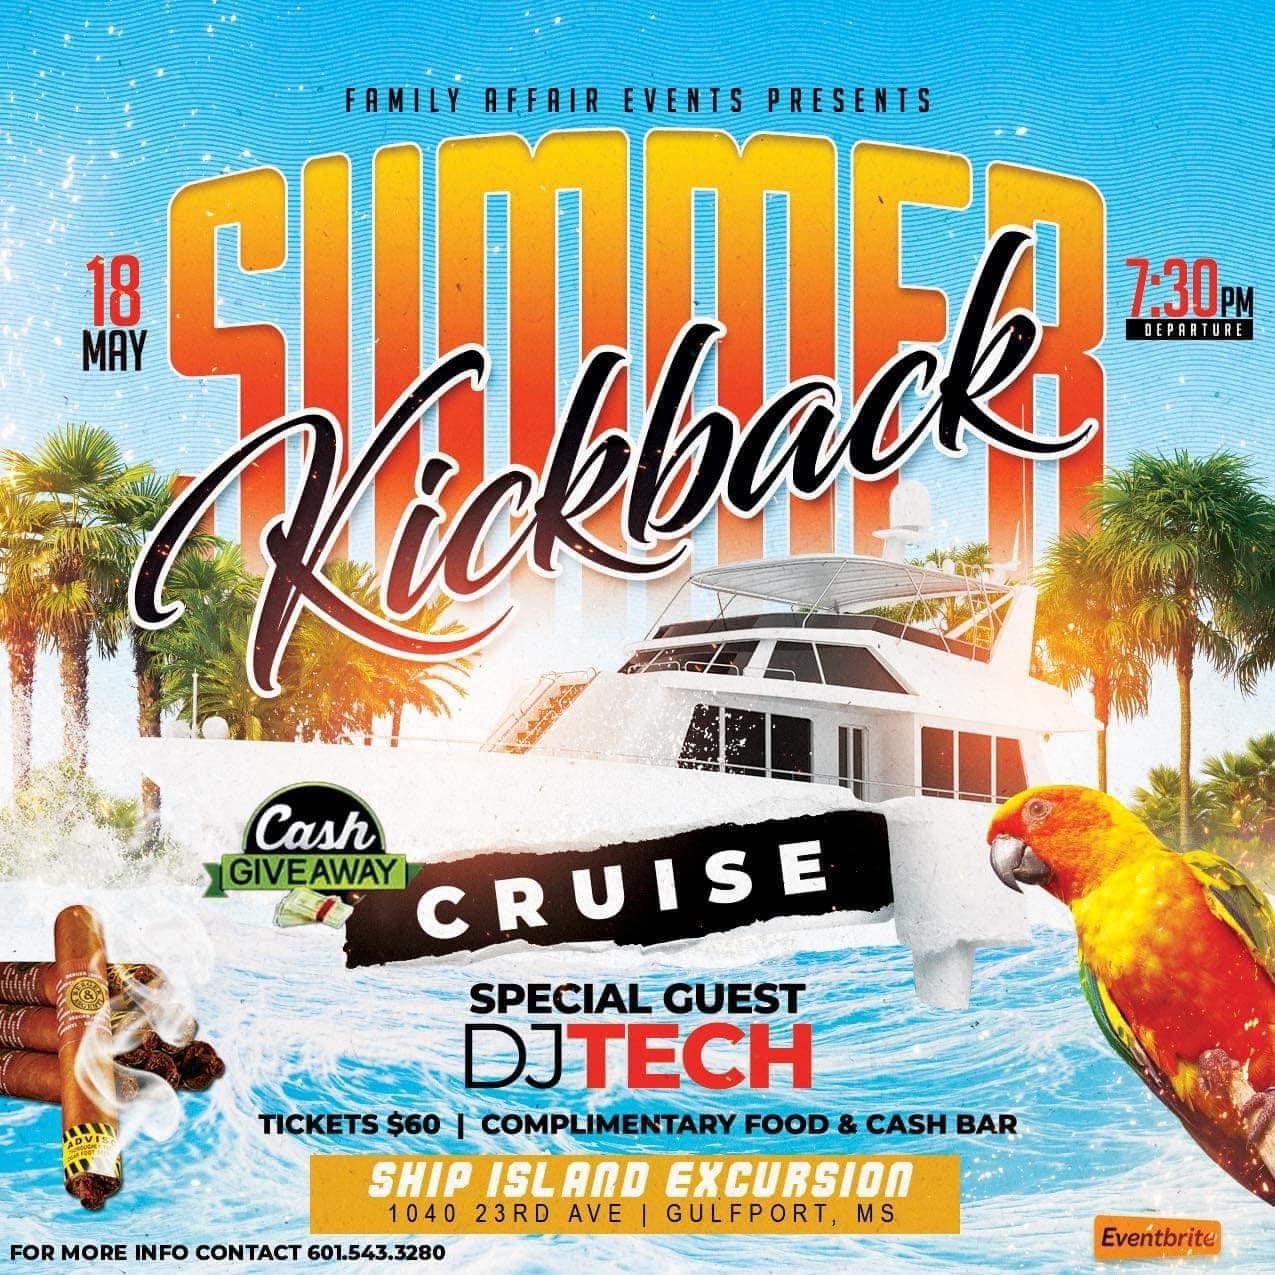 Please be at the dock by 6:30p. We are leaving on time&hellip; Summer Kickback Cruise w/ DJ Tech 🛥️ #djtech #listen